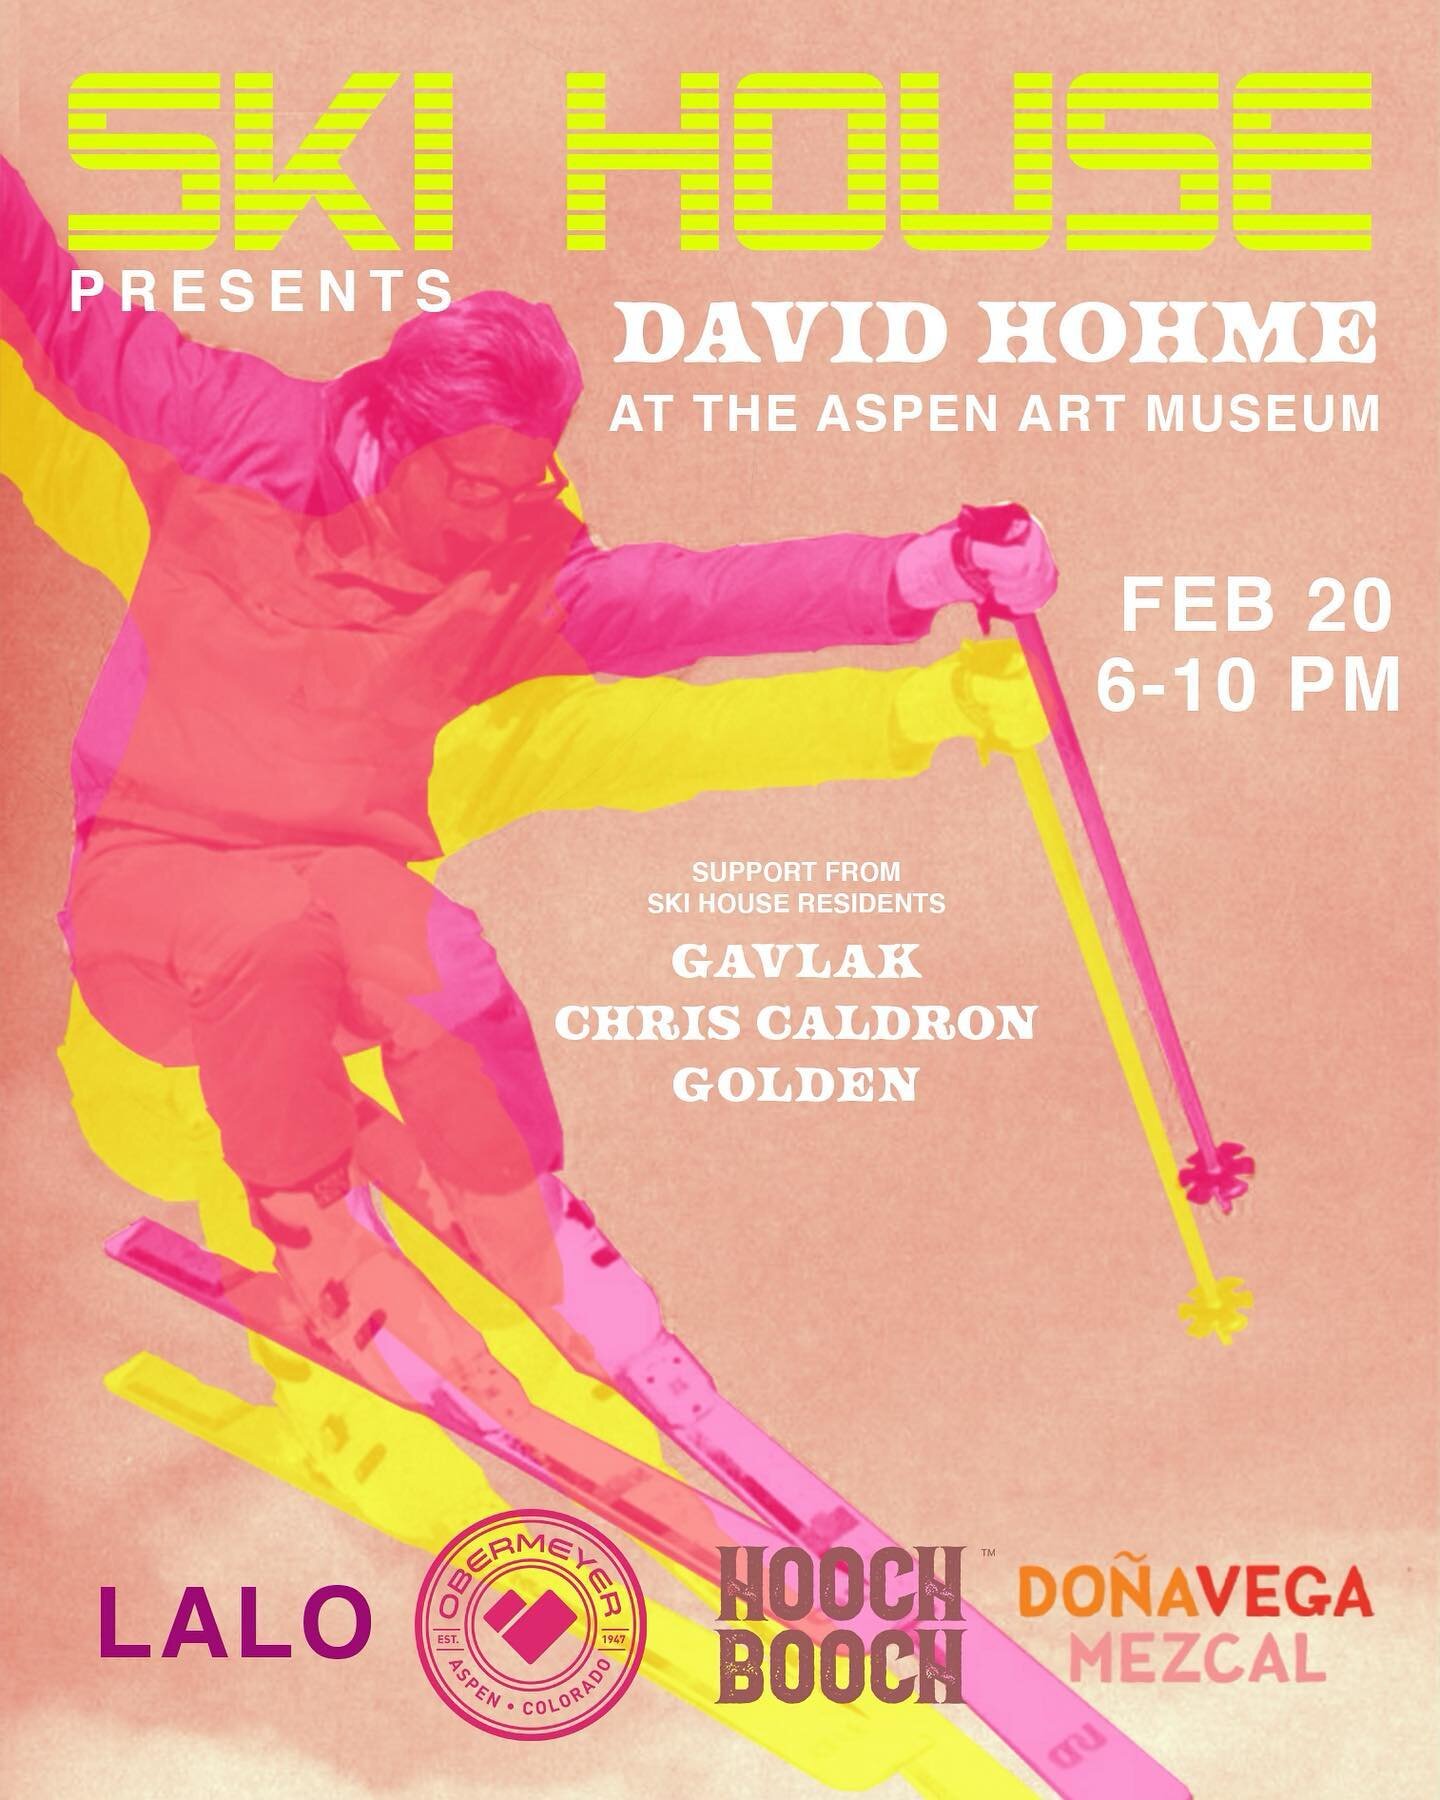 🎿SKI HOUSE is BACK and excited to present a mesmerizing evening at the Aspen Art Museum with music from the world-renowned @davidhohme and support from Colorado locals Golden, Chris Cauldron and Gavlak. Ticket link in bio! Sponsored by @lalospirits 